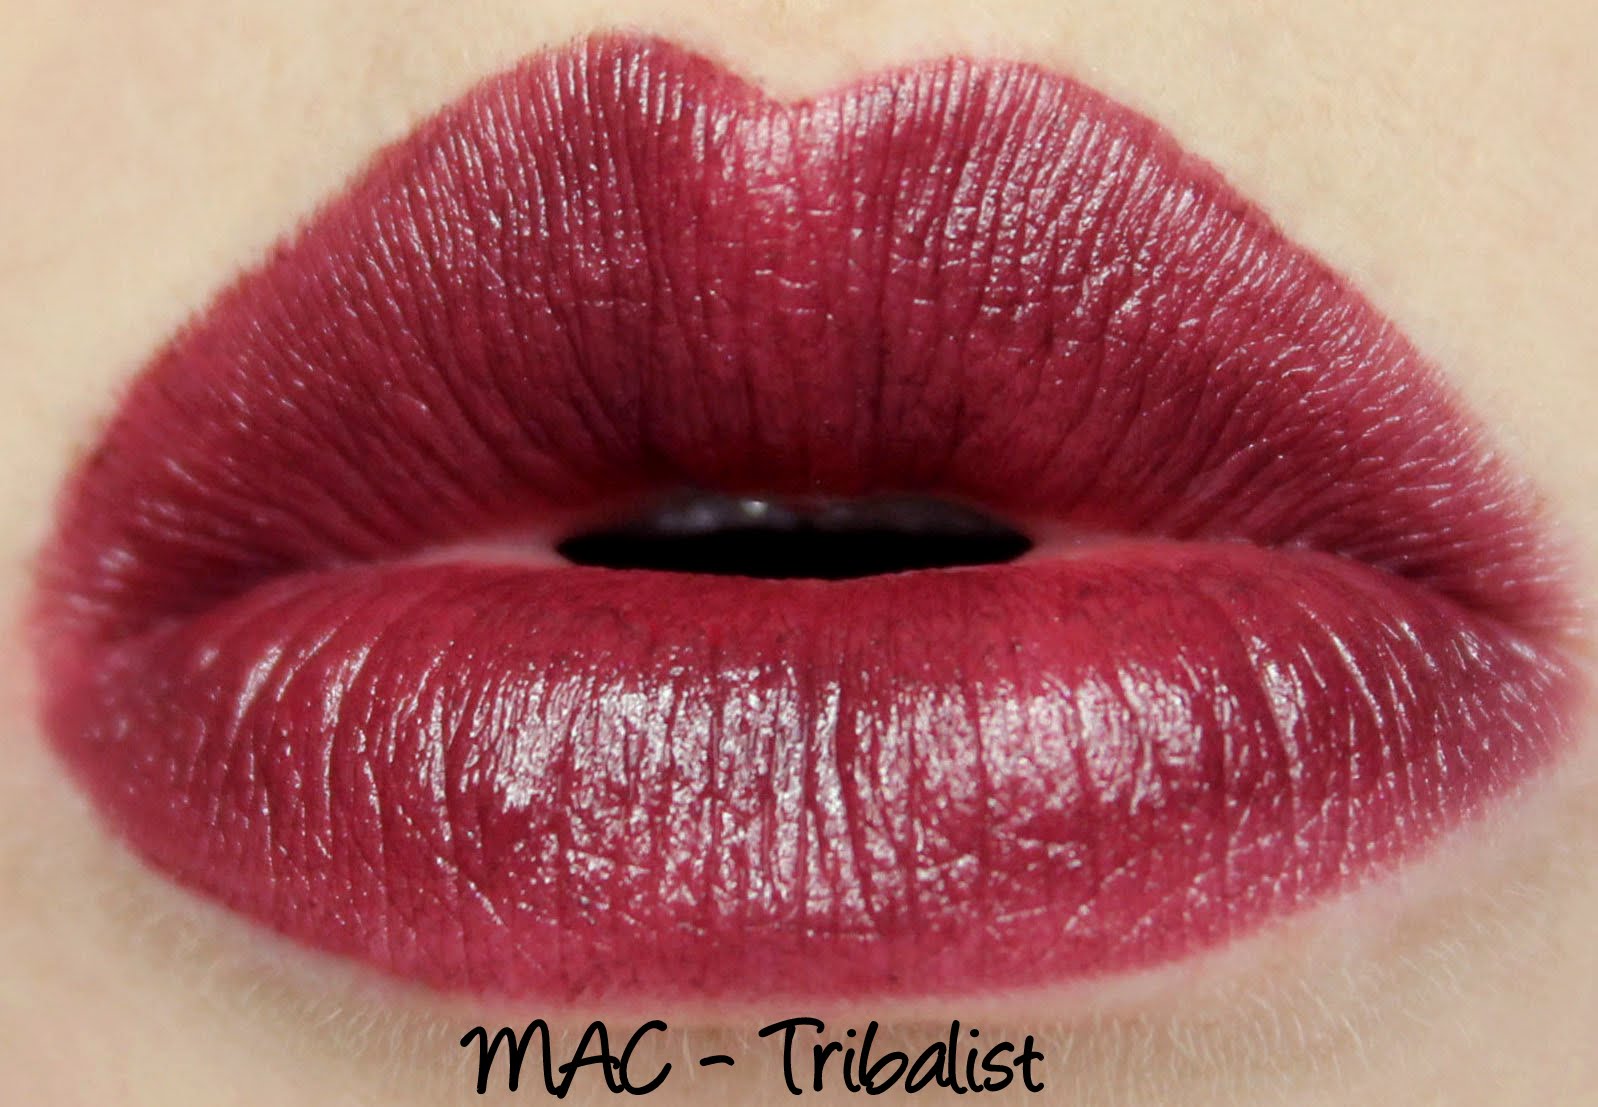 MAC Heirloom Mix Lipstick - Tribalist Swatches & Review